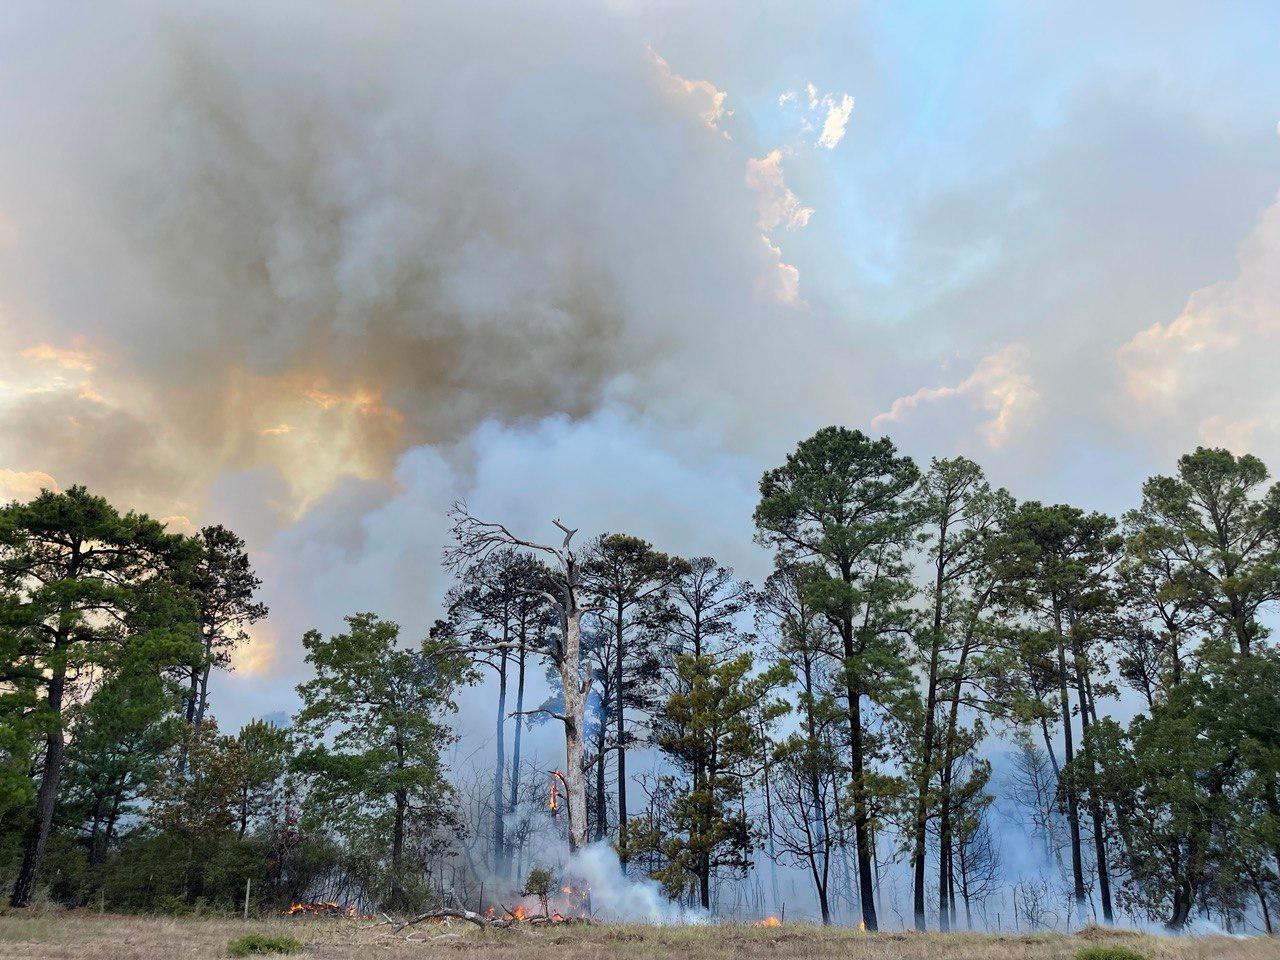 White and grey smoke rises from the ground and up through the trees, filling the sky.  Dry grass covers the foreground.